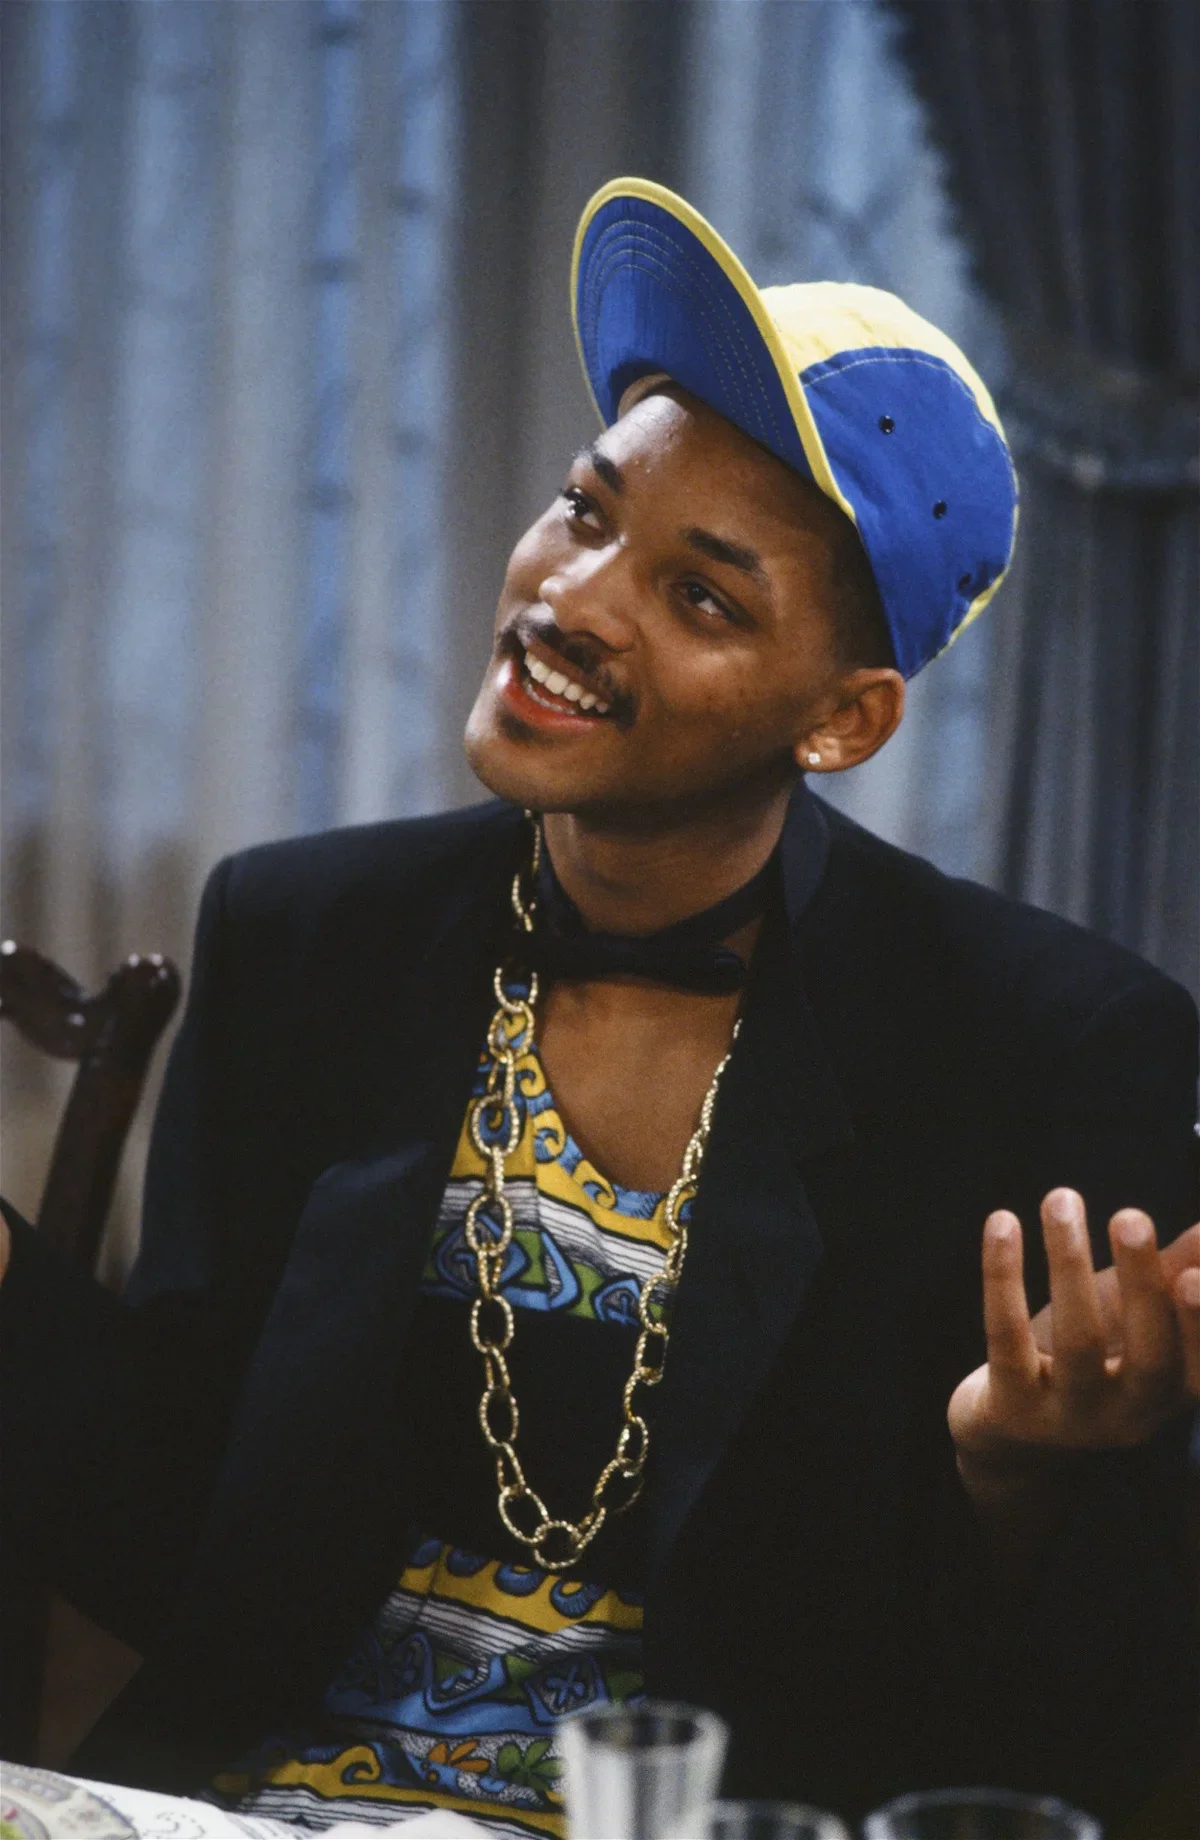 Will Smith Aesthetic, Smile, Microphone, Human, Cap, Gesture